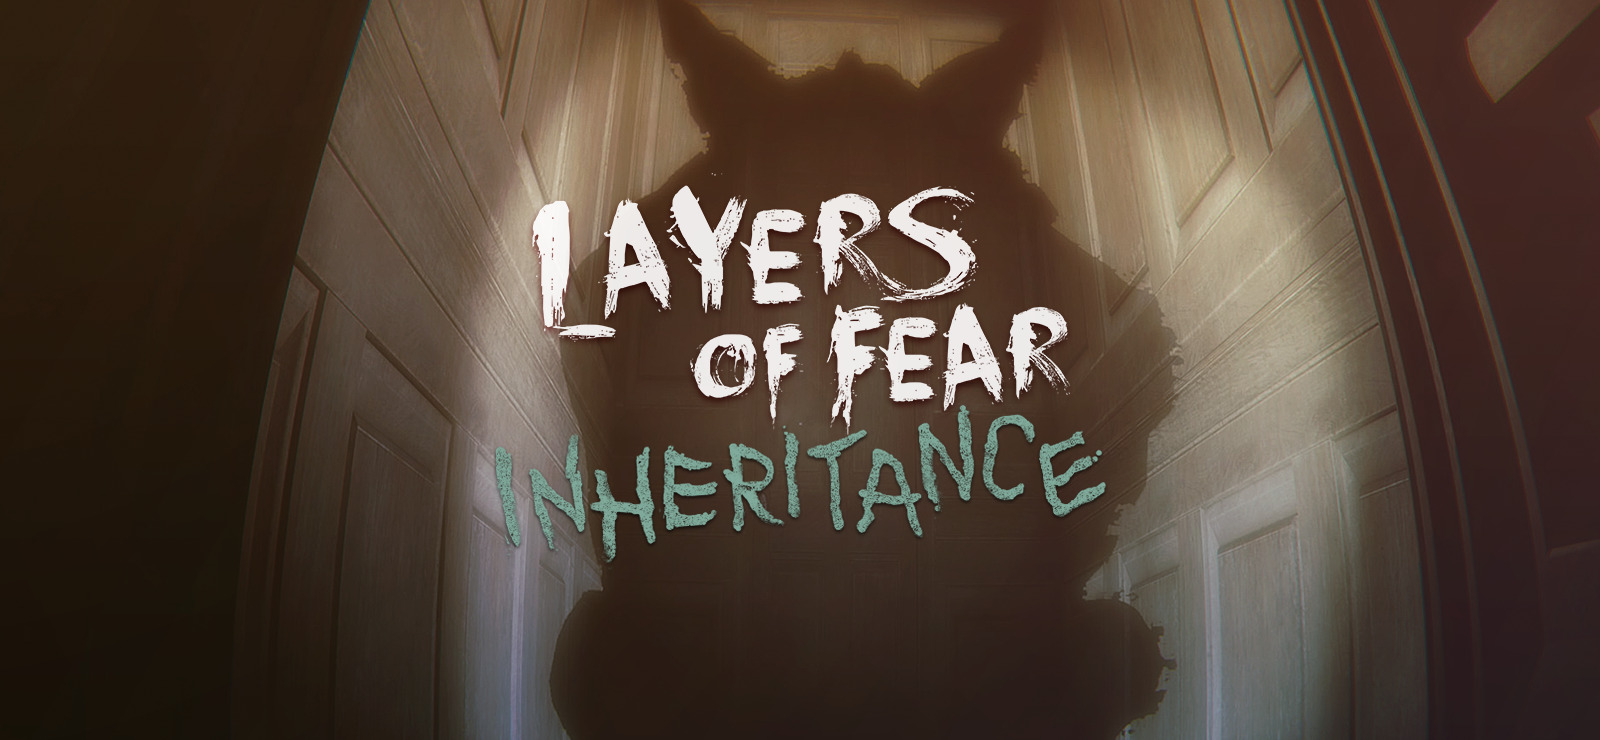  Layers of Fear: Inheritance [Online Game Code] : Video Games